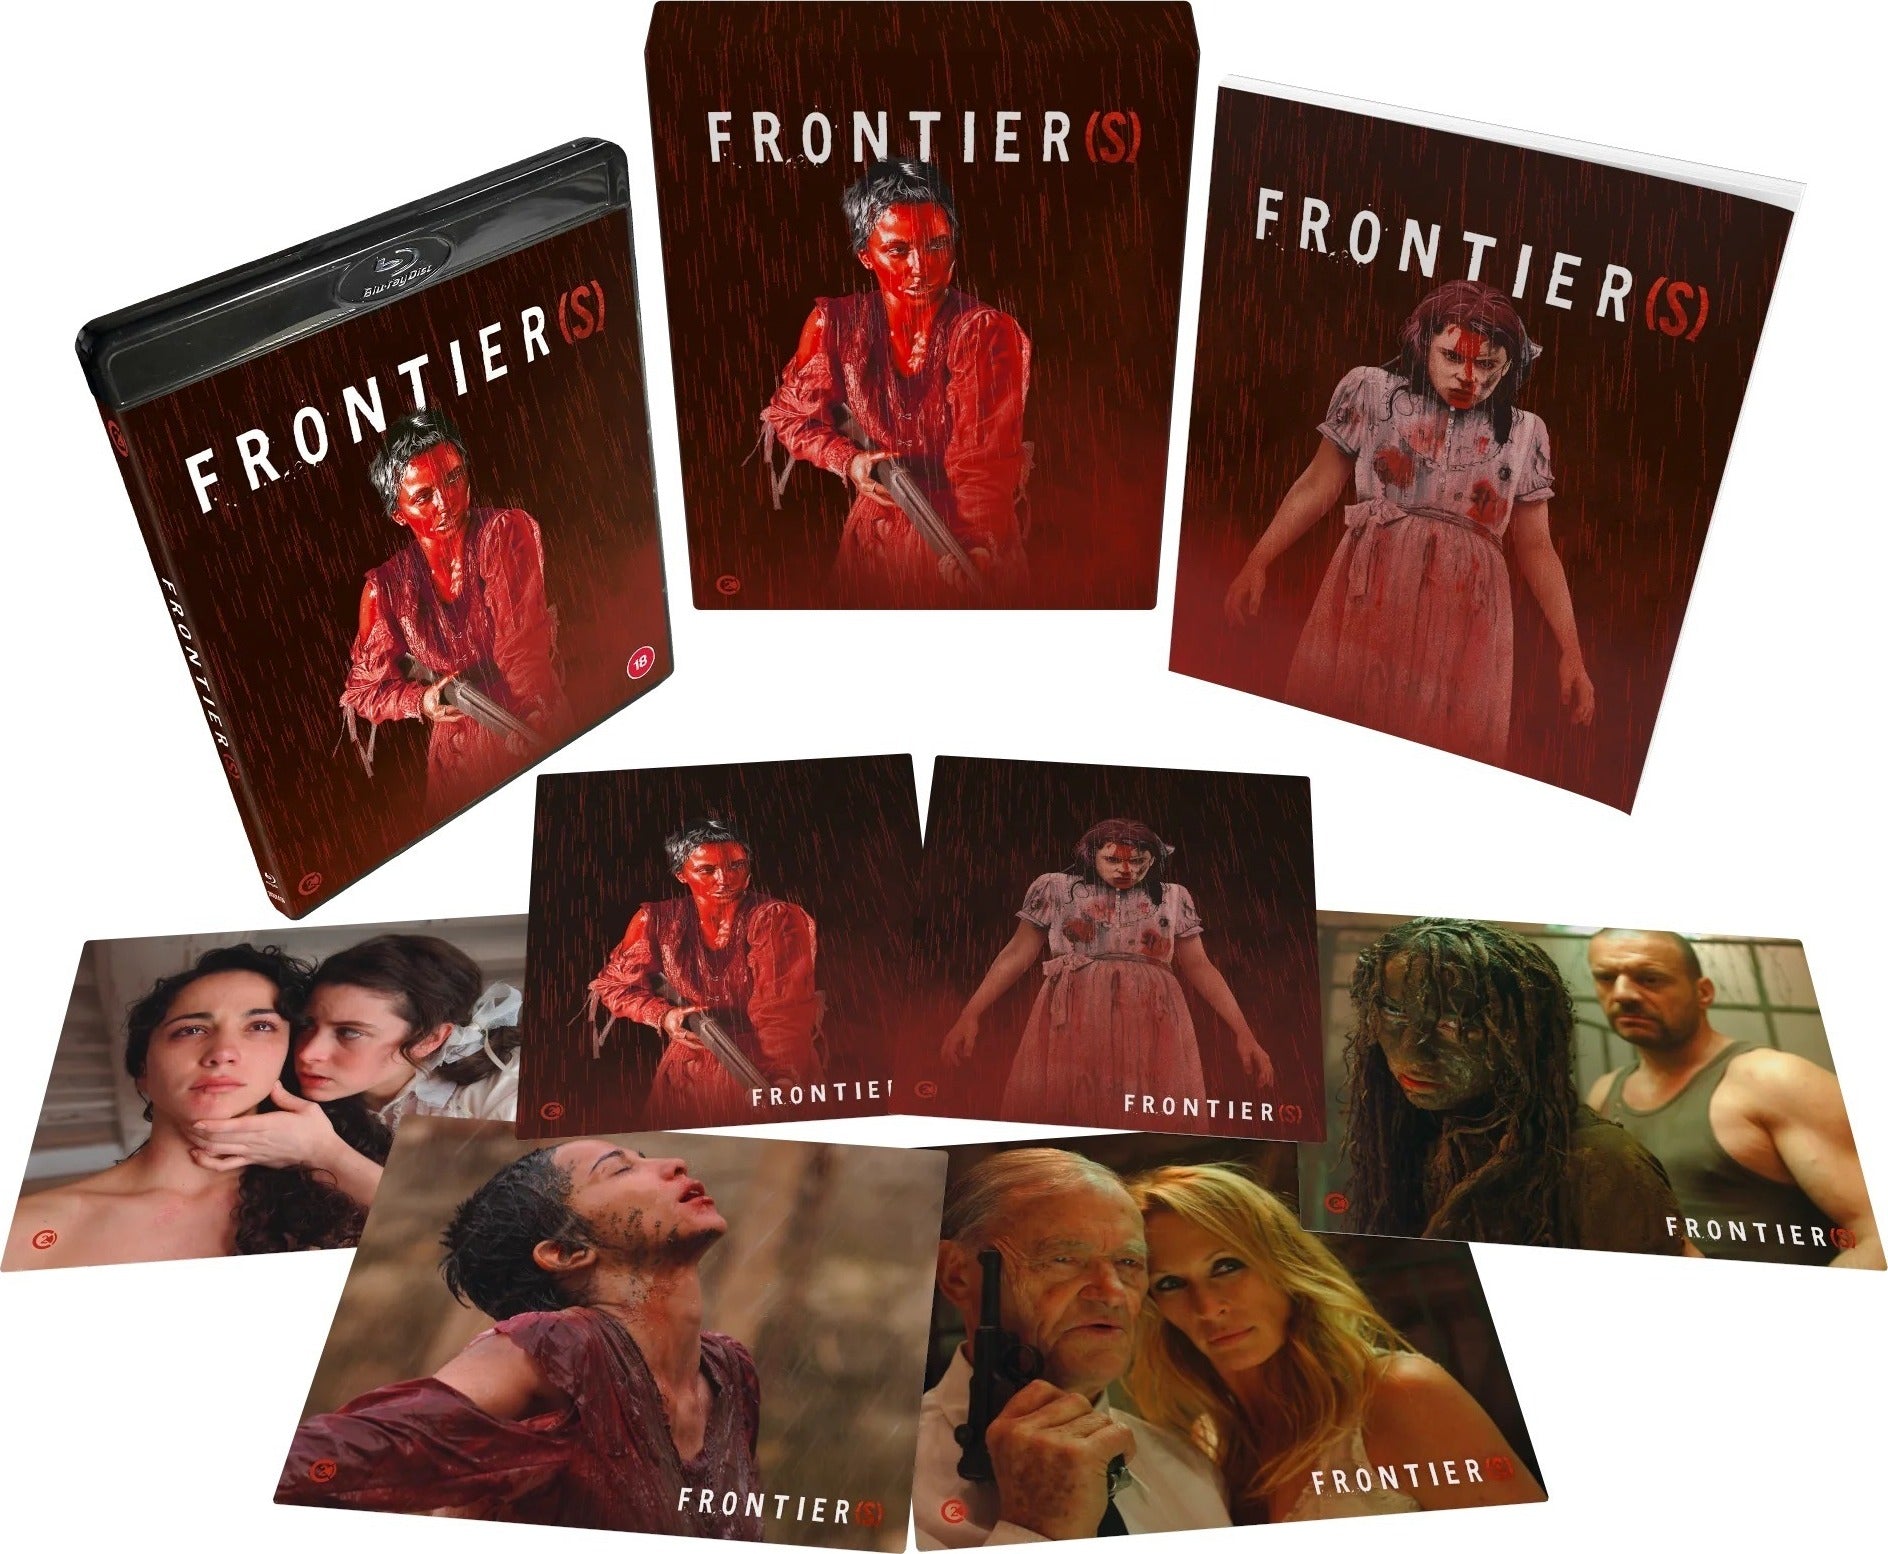 FRONTIER(S) (REGION B  IMPORT - LIMITED EDITION) BLU-RAY